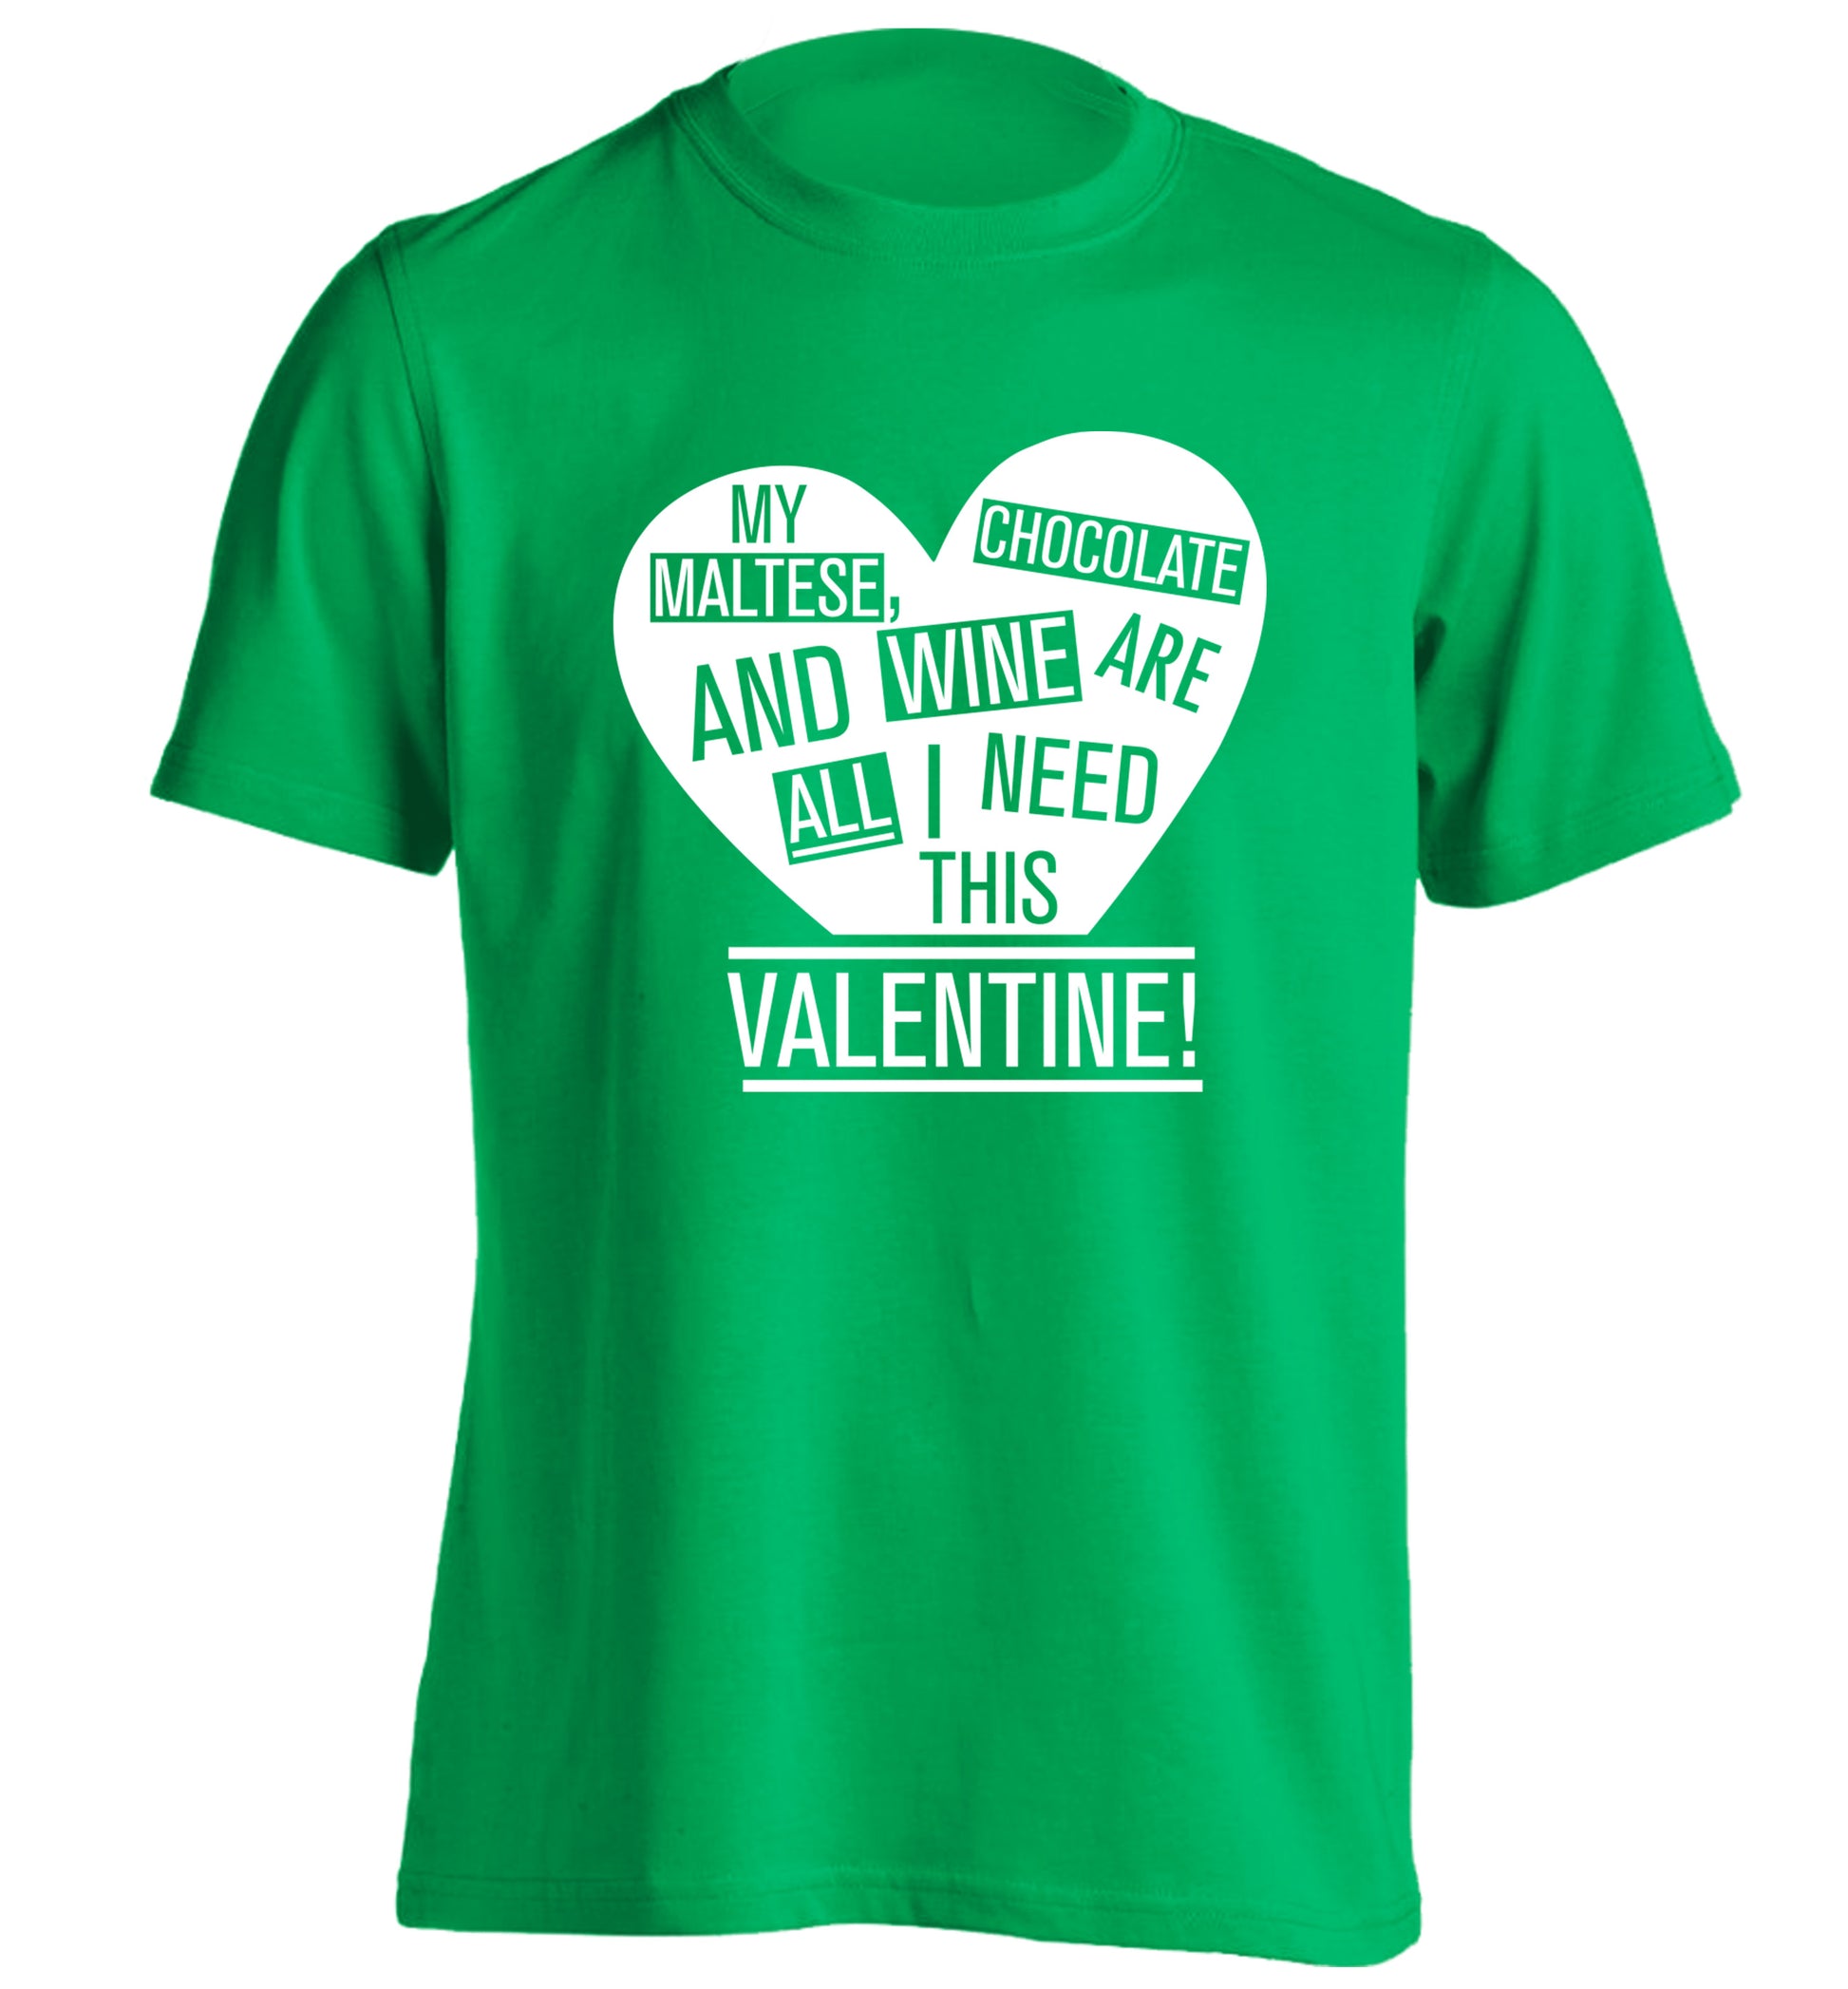 My maltese, chocolate and wine are all I need this valentine! adults unisex green Tshirt 2XL